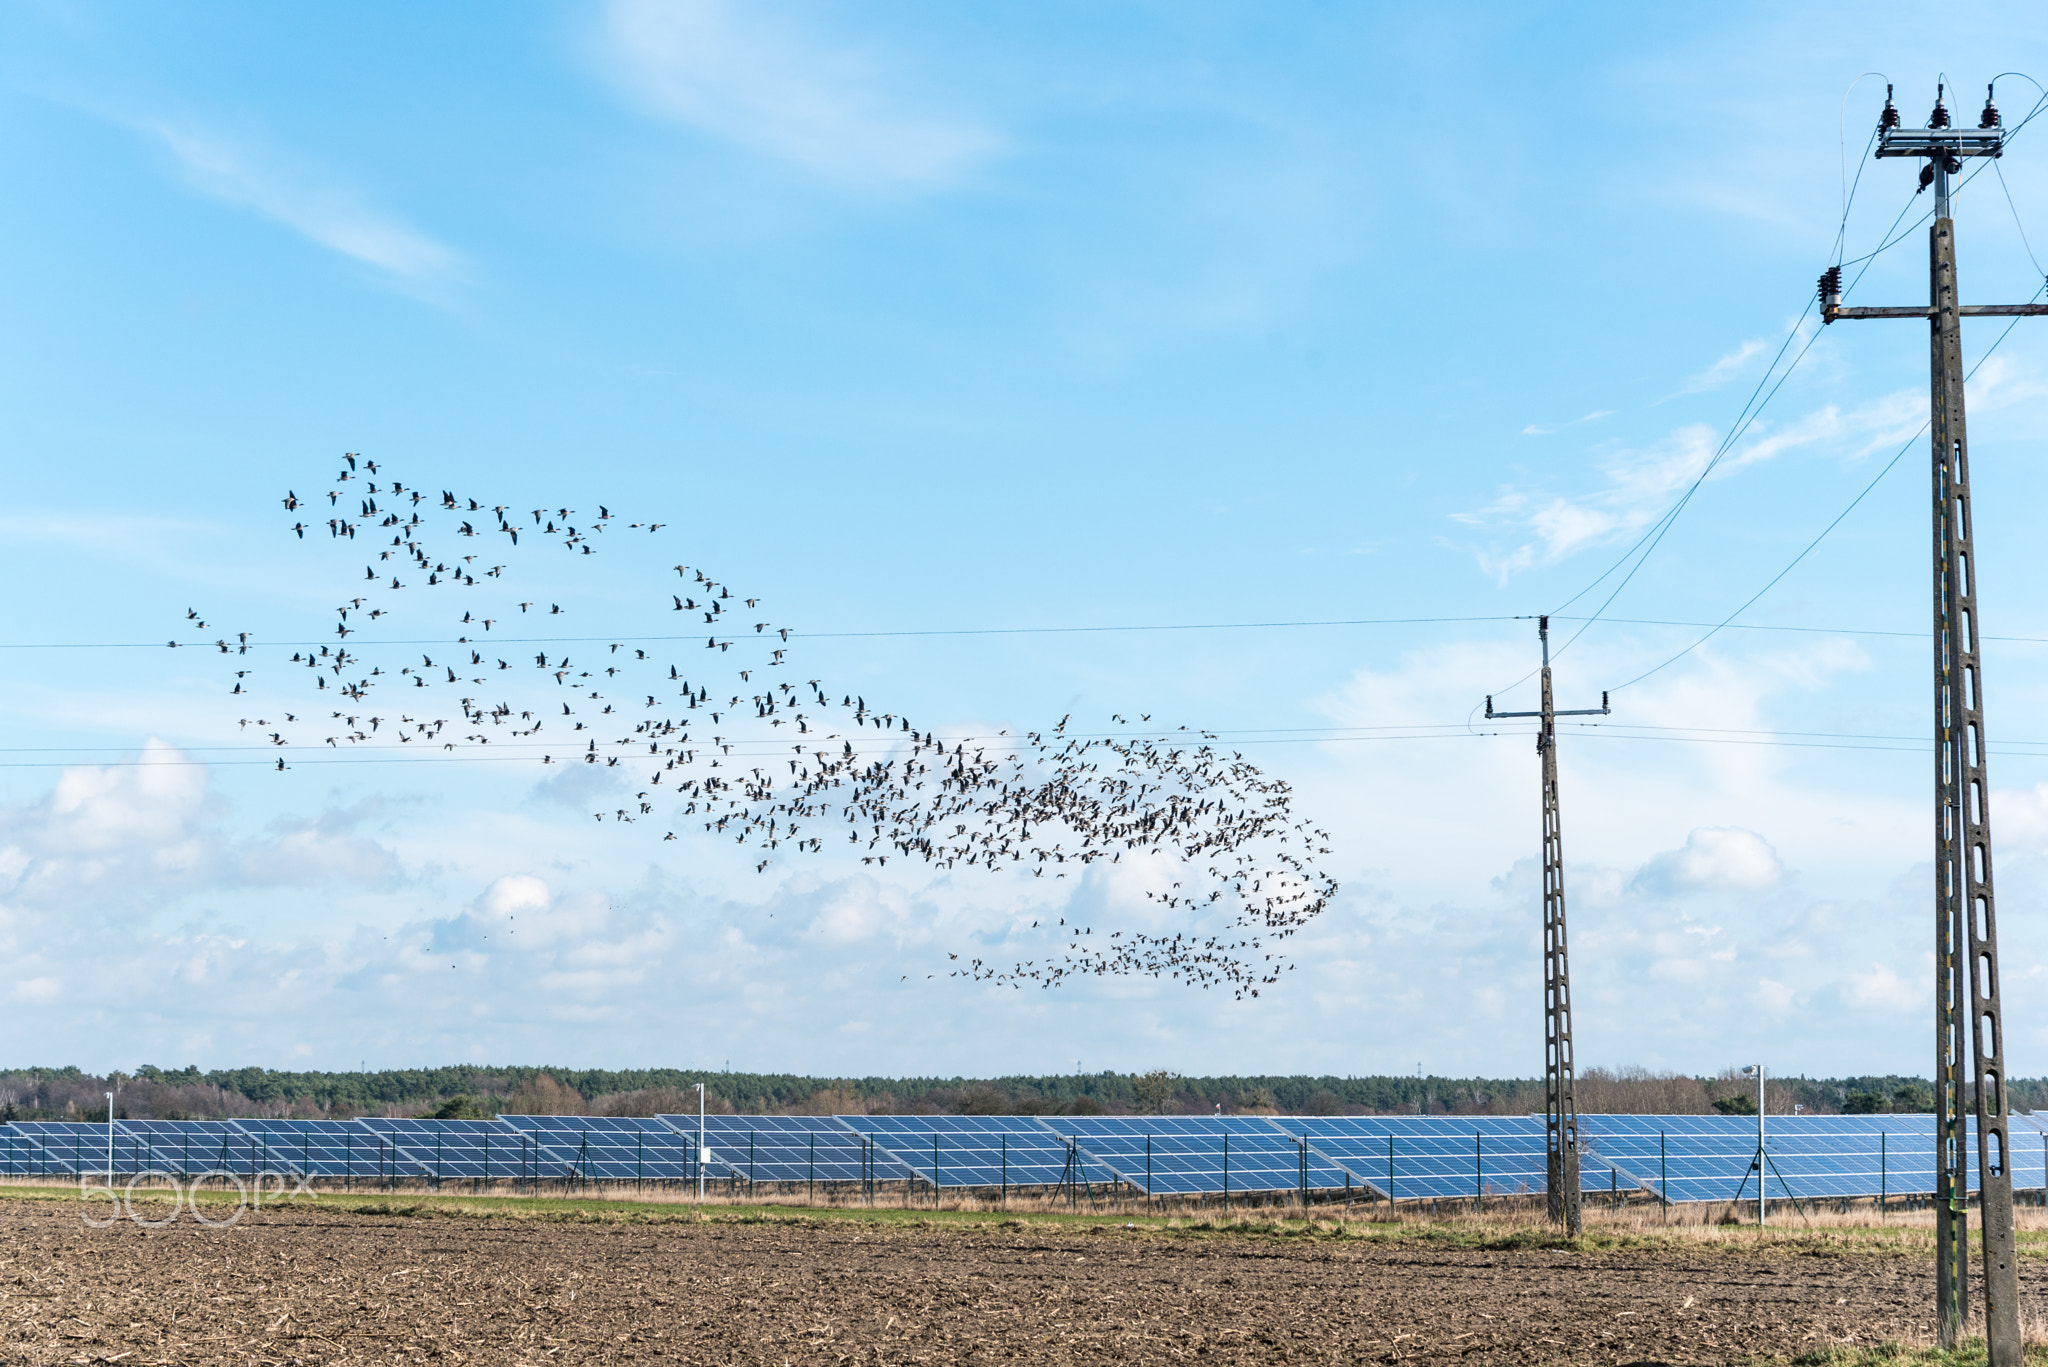 A large flock of birds flying over a photovoltaic solar panels farm.